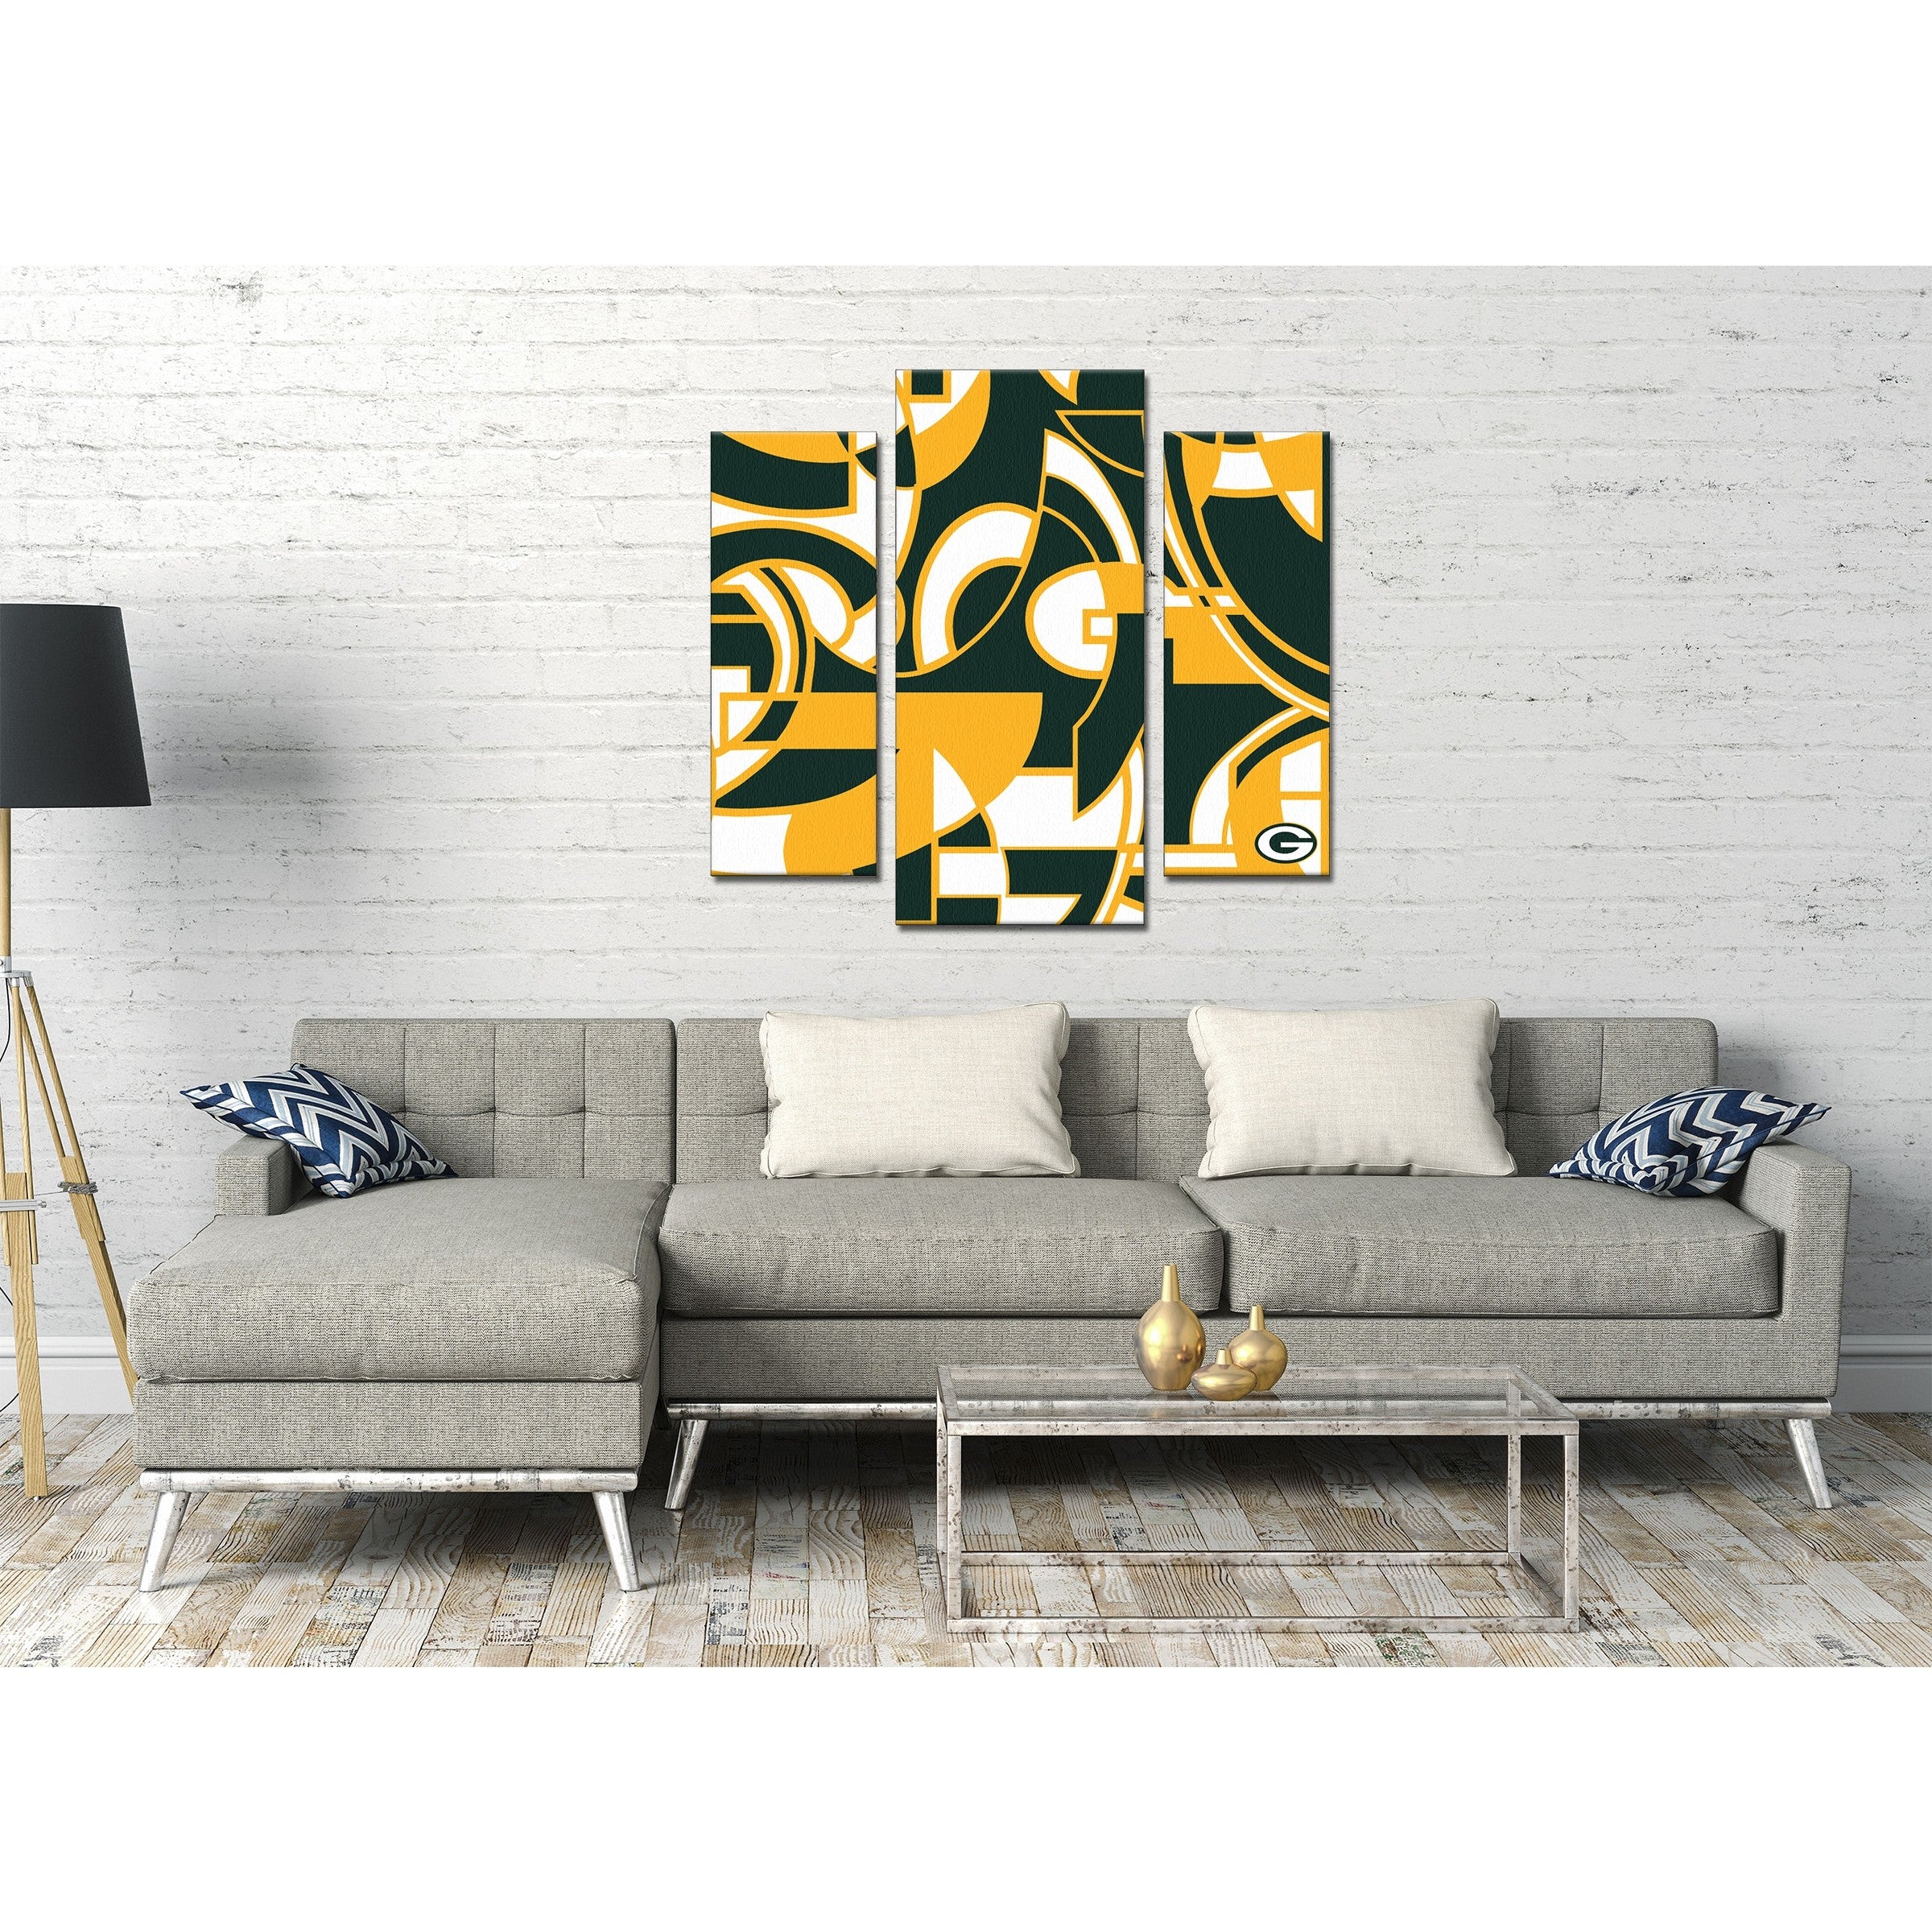 Imperial Green Bay Packers Modern 3 Piece Wall Art